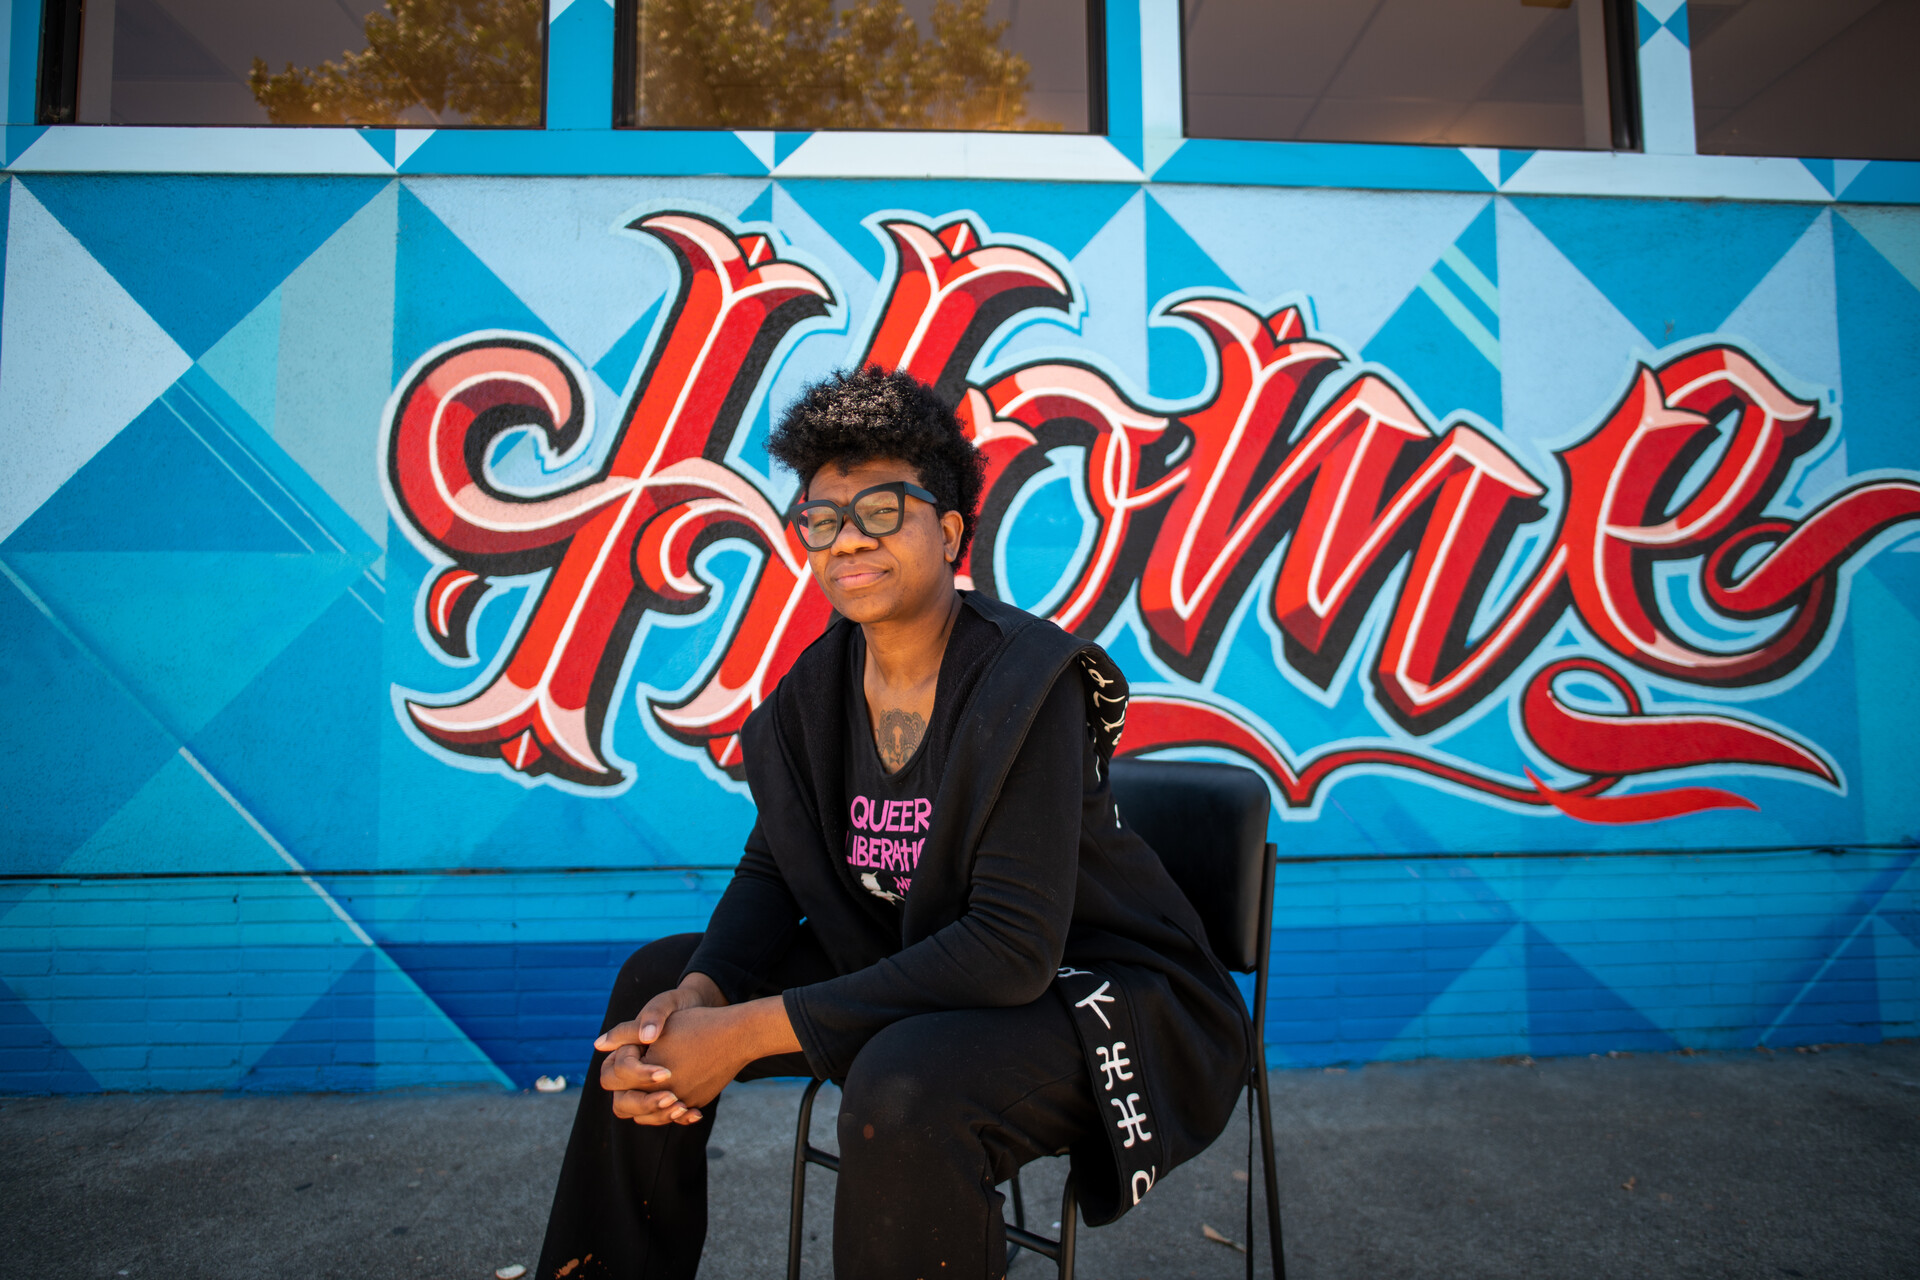 A Black woman wearing a black suit and glasses sits in front of a blue and red mural that reads "Home"